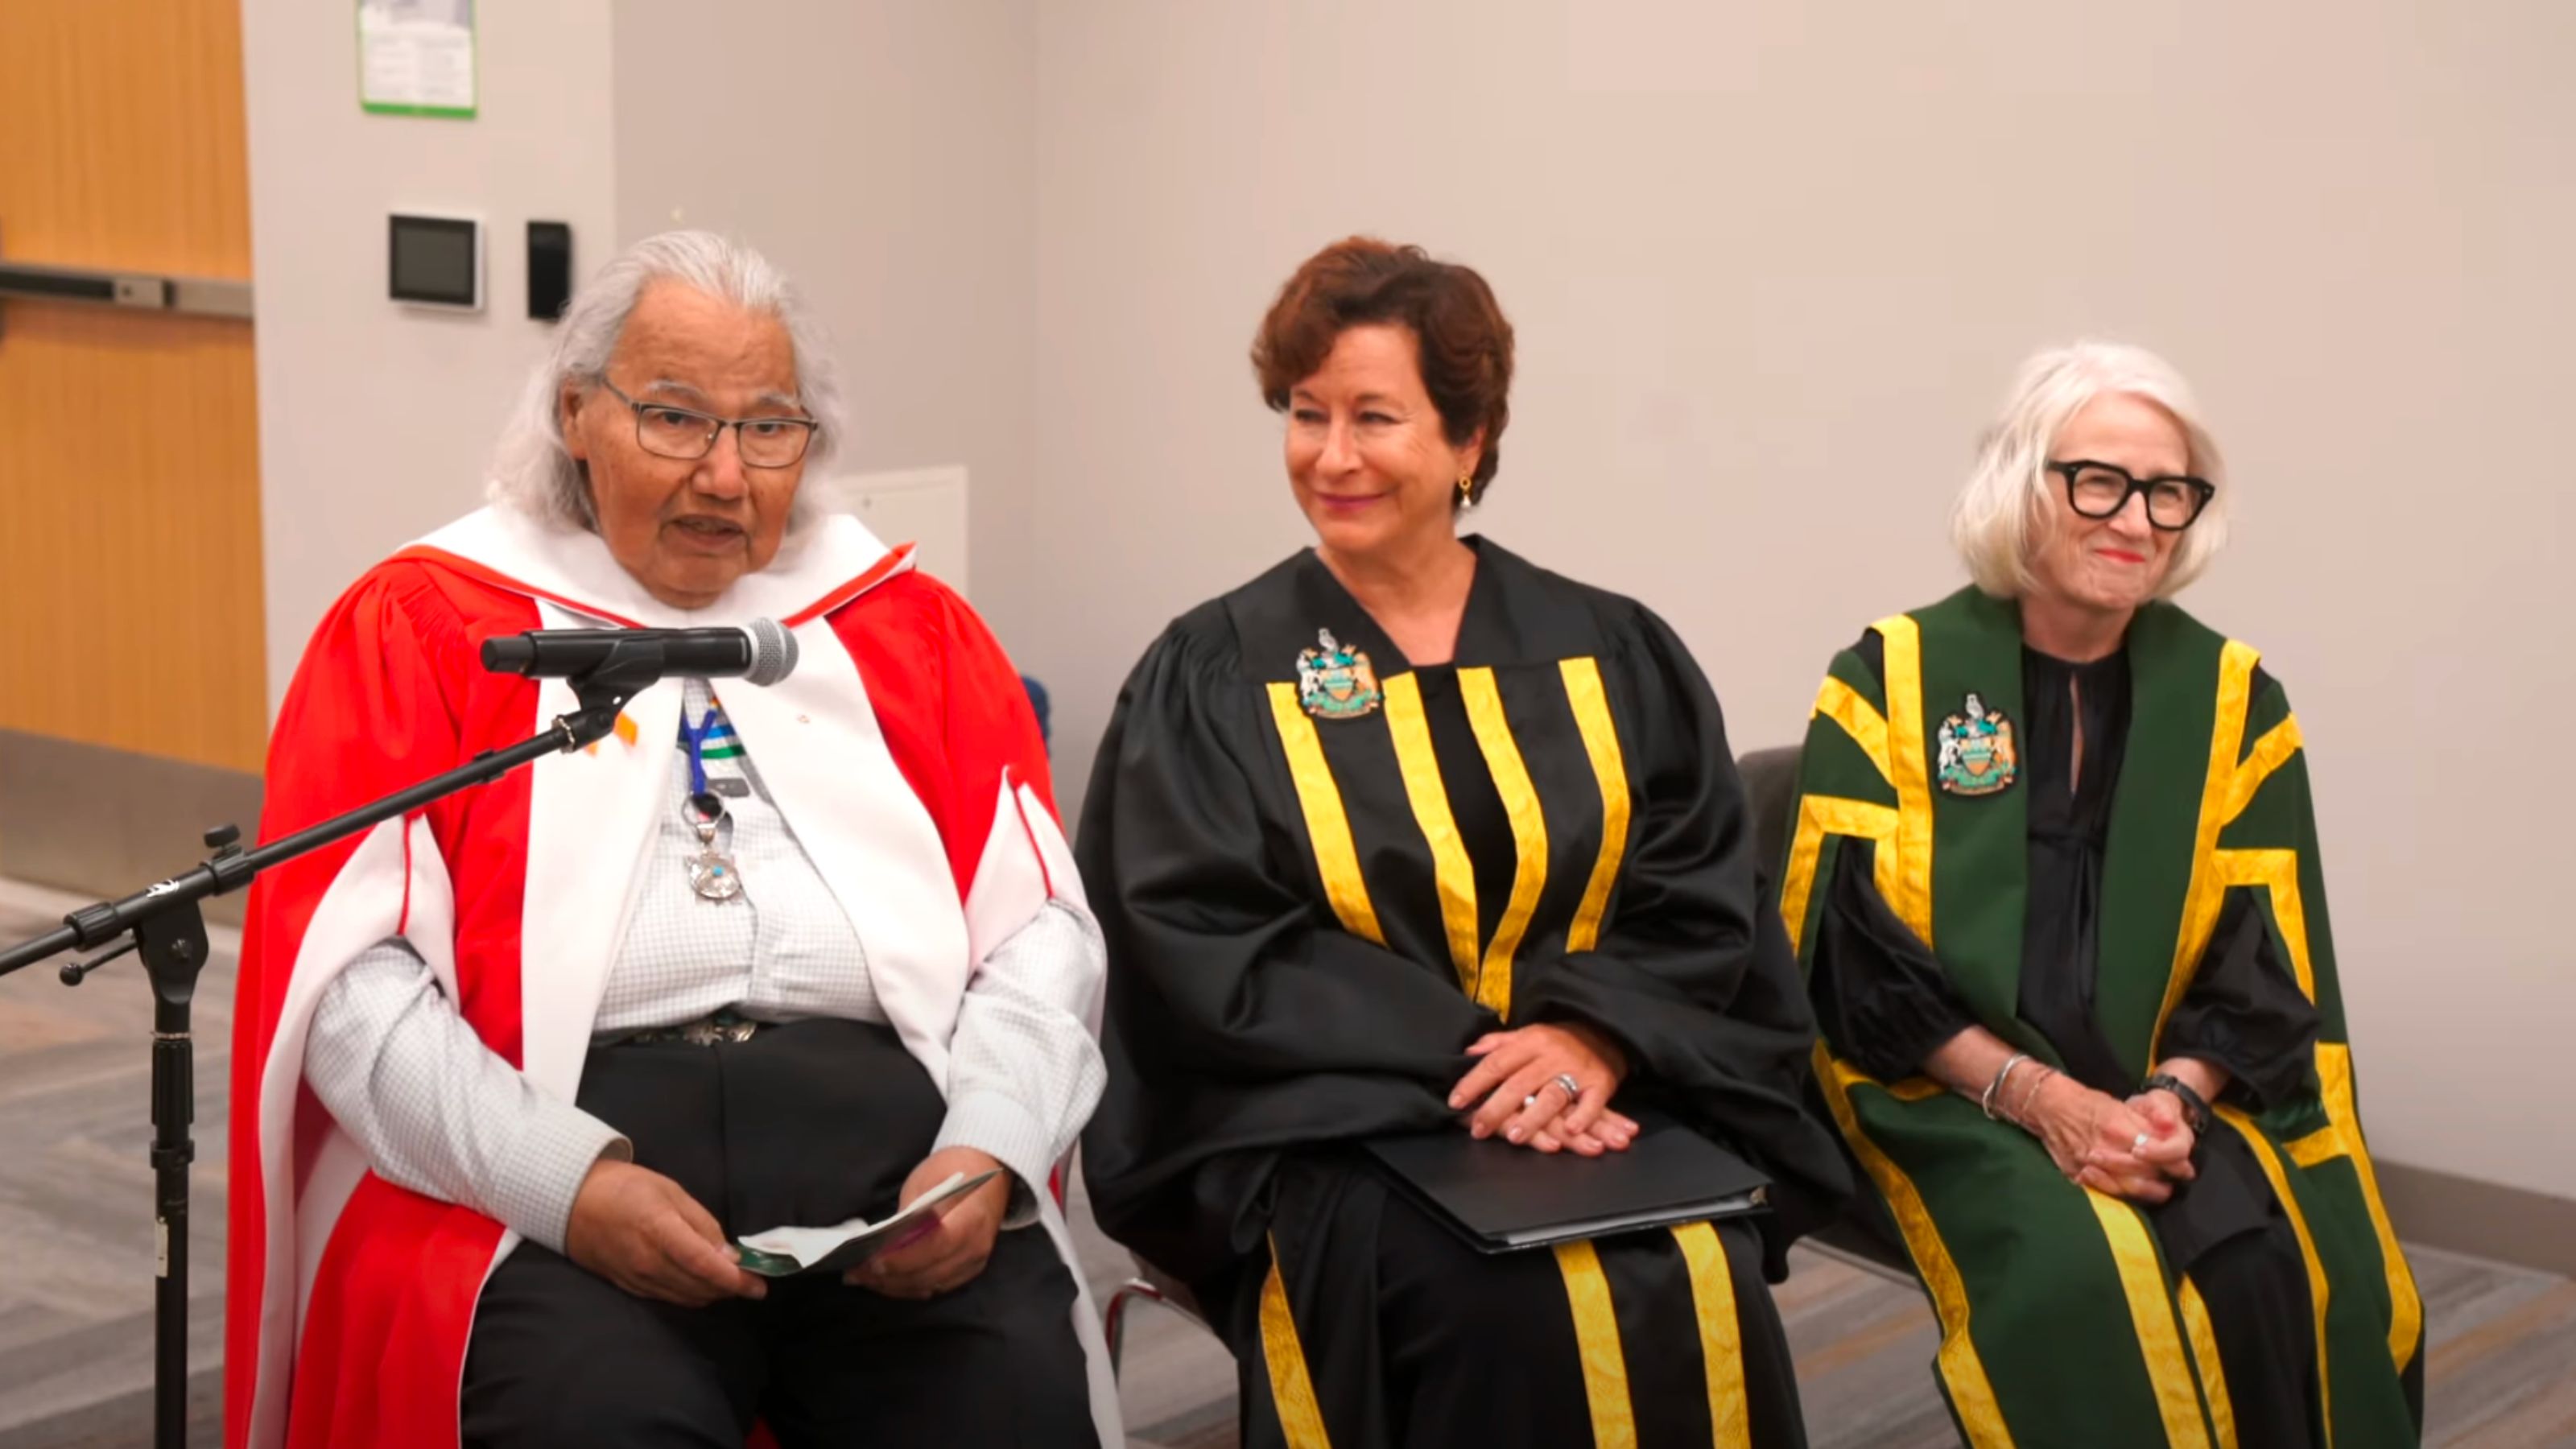 Three people seated: Honourable Murray Sinclair, Chancellor Peggy Garritty and Board Chair Kate Chisholm in Winnipeg for a special ceremony to confer an honorary Doctorate of Laws on the Honourable Sinclair.